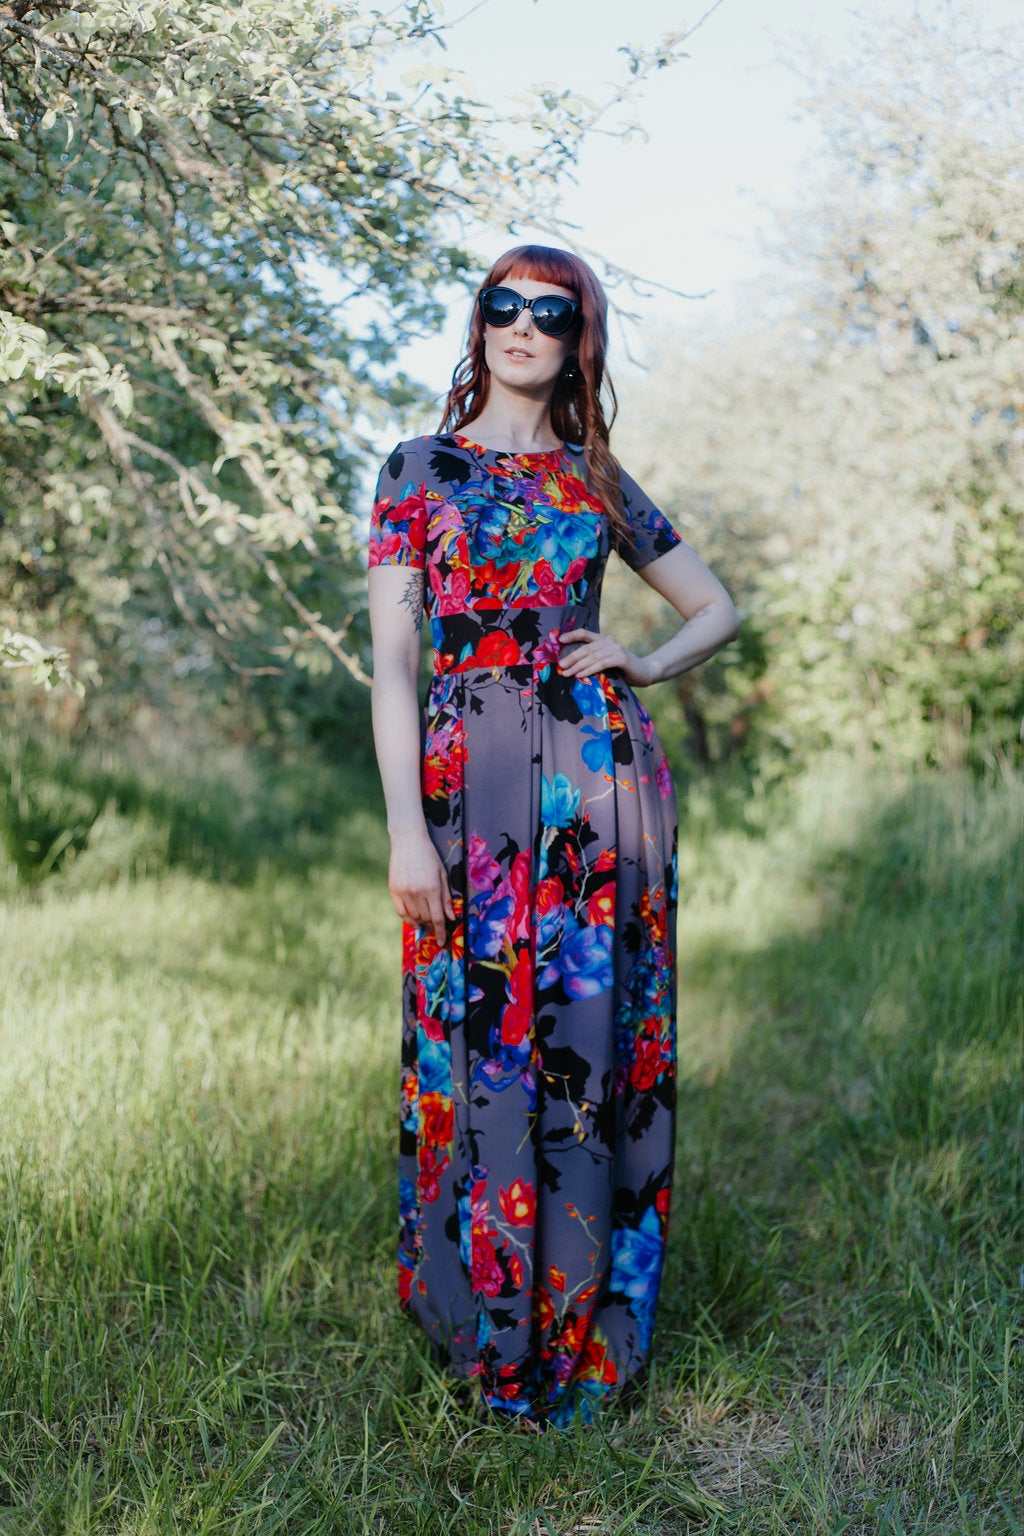 Gray long dress with painted bright flowers